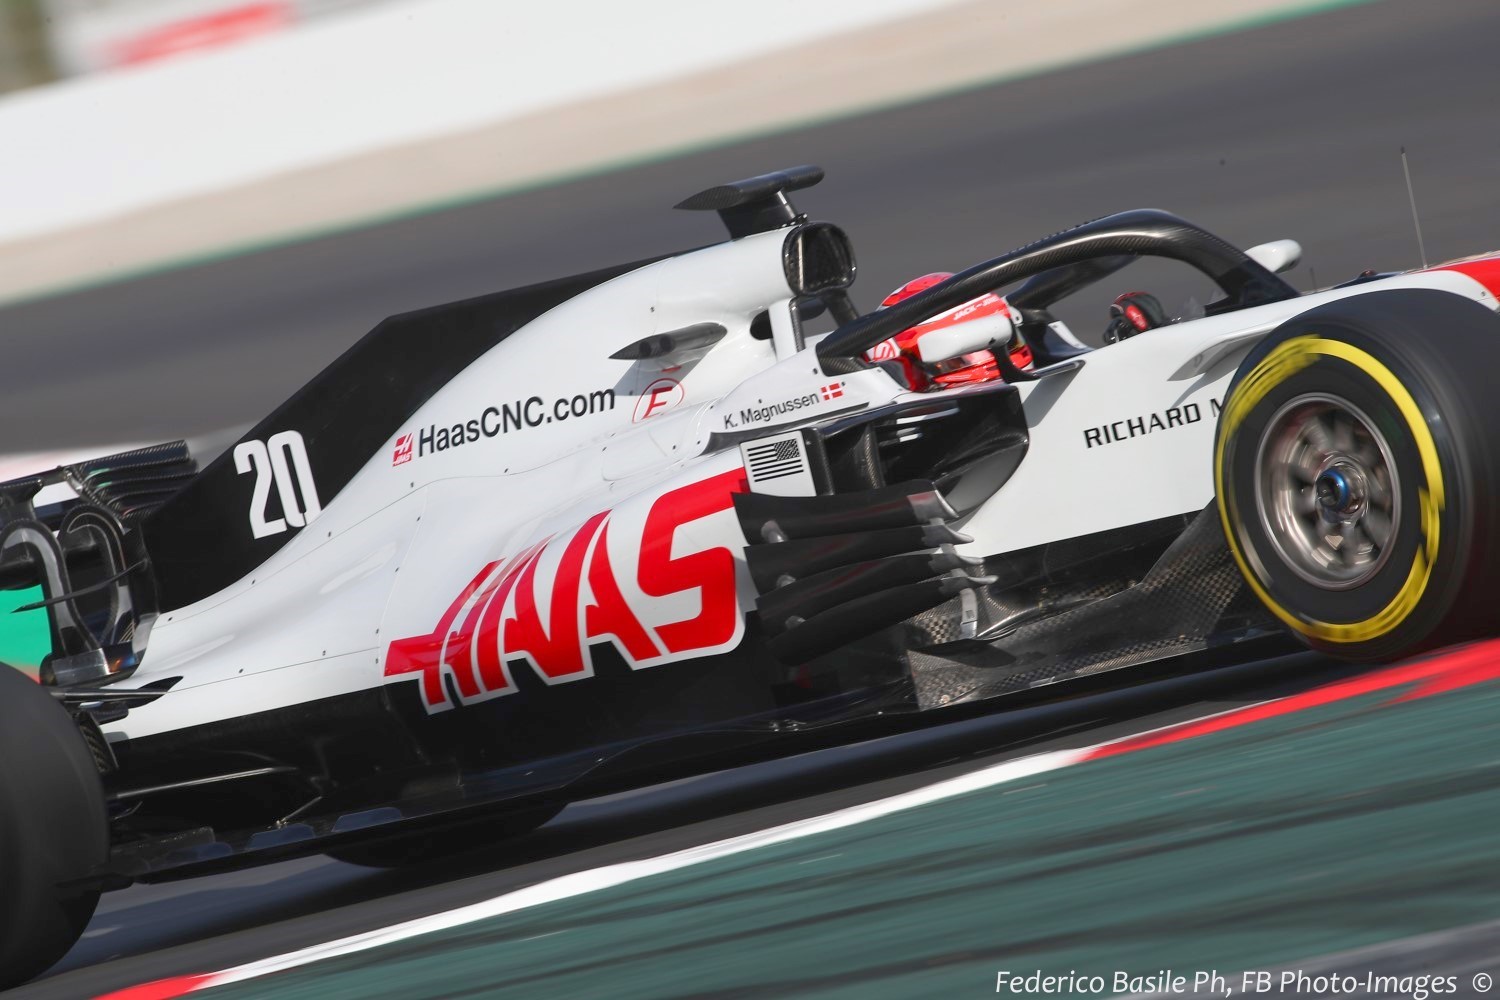 Is the new Haas fast or was it running light? We will know in 5 days